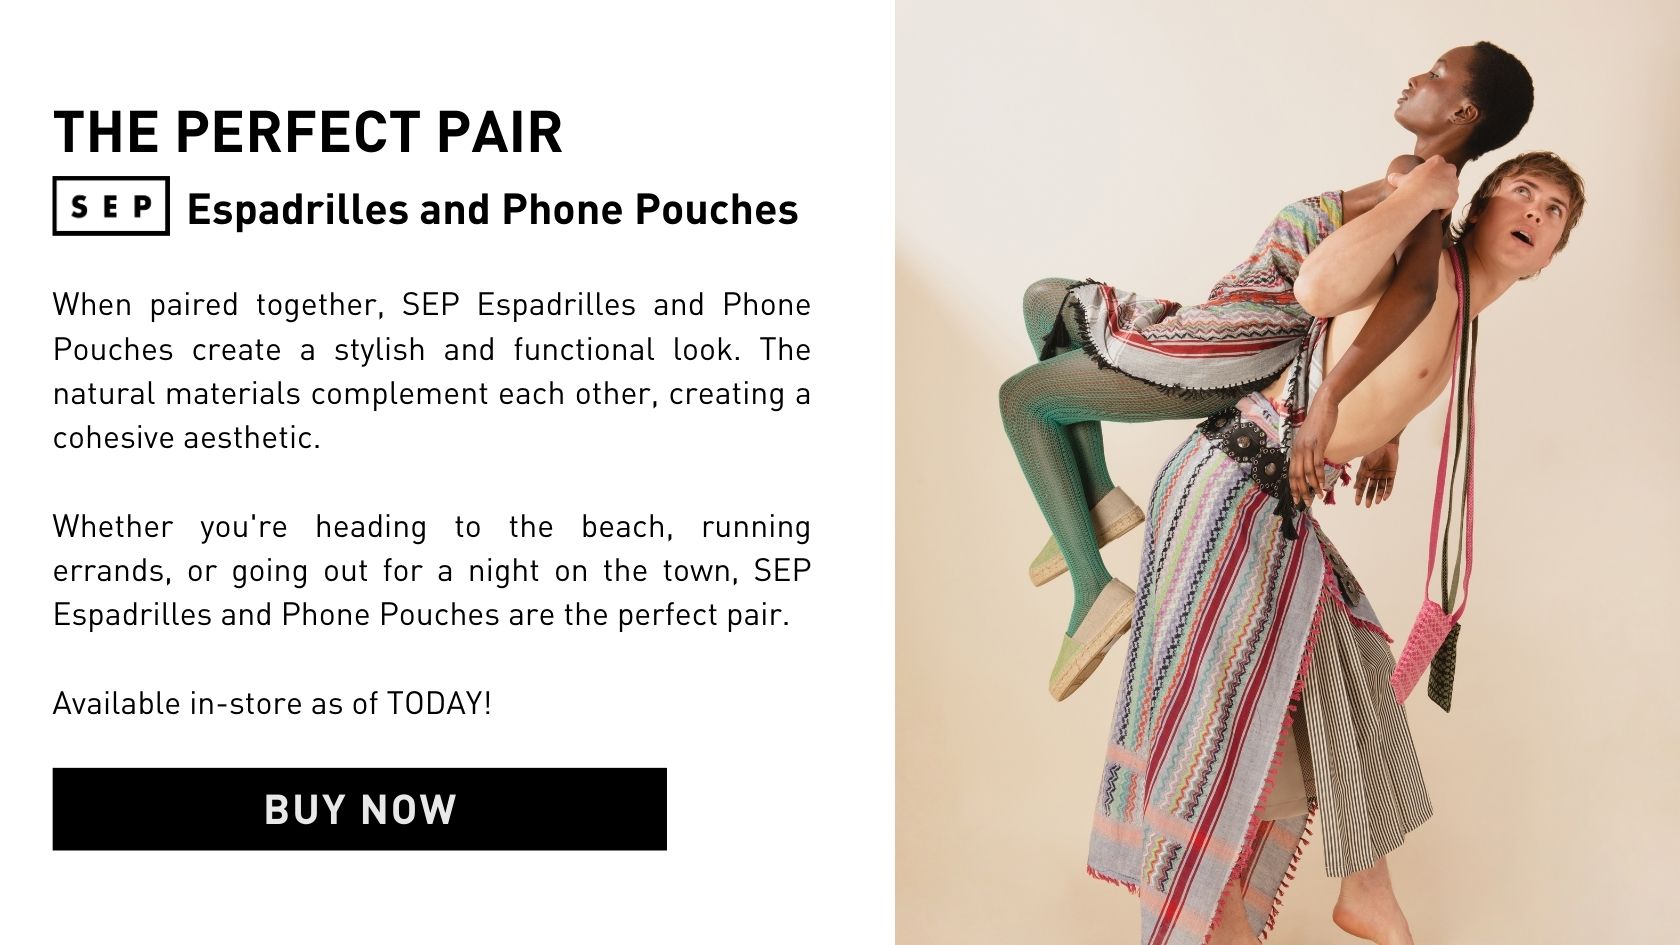 When paired together, SEP Espadrilles and Phone Pouches create a stylish and functional look. The natural materials complement each other, creating a cohesive aesthetic.   Whether you're heading to the beach, running errands, or going out for a night on the town, SEP Espadrilles and Phone Pouches are the perfect pair.   Available in-store as of TODAY!